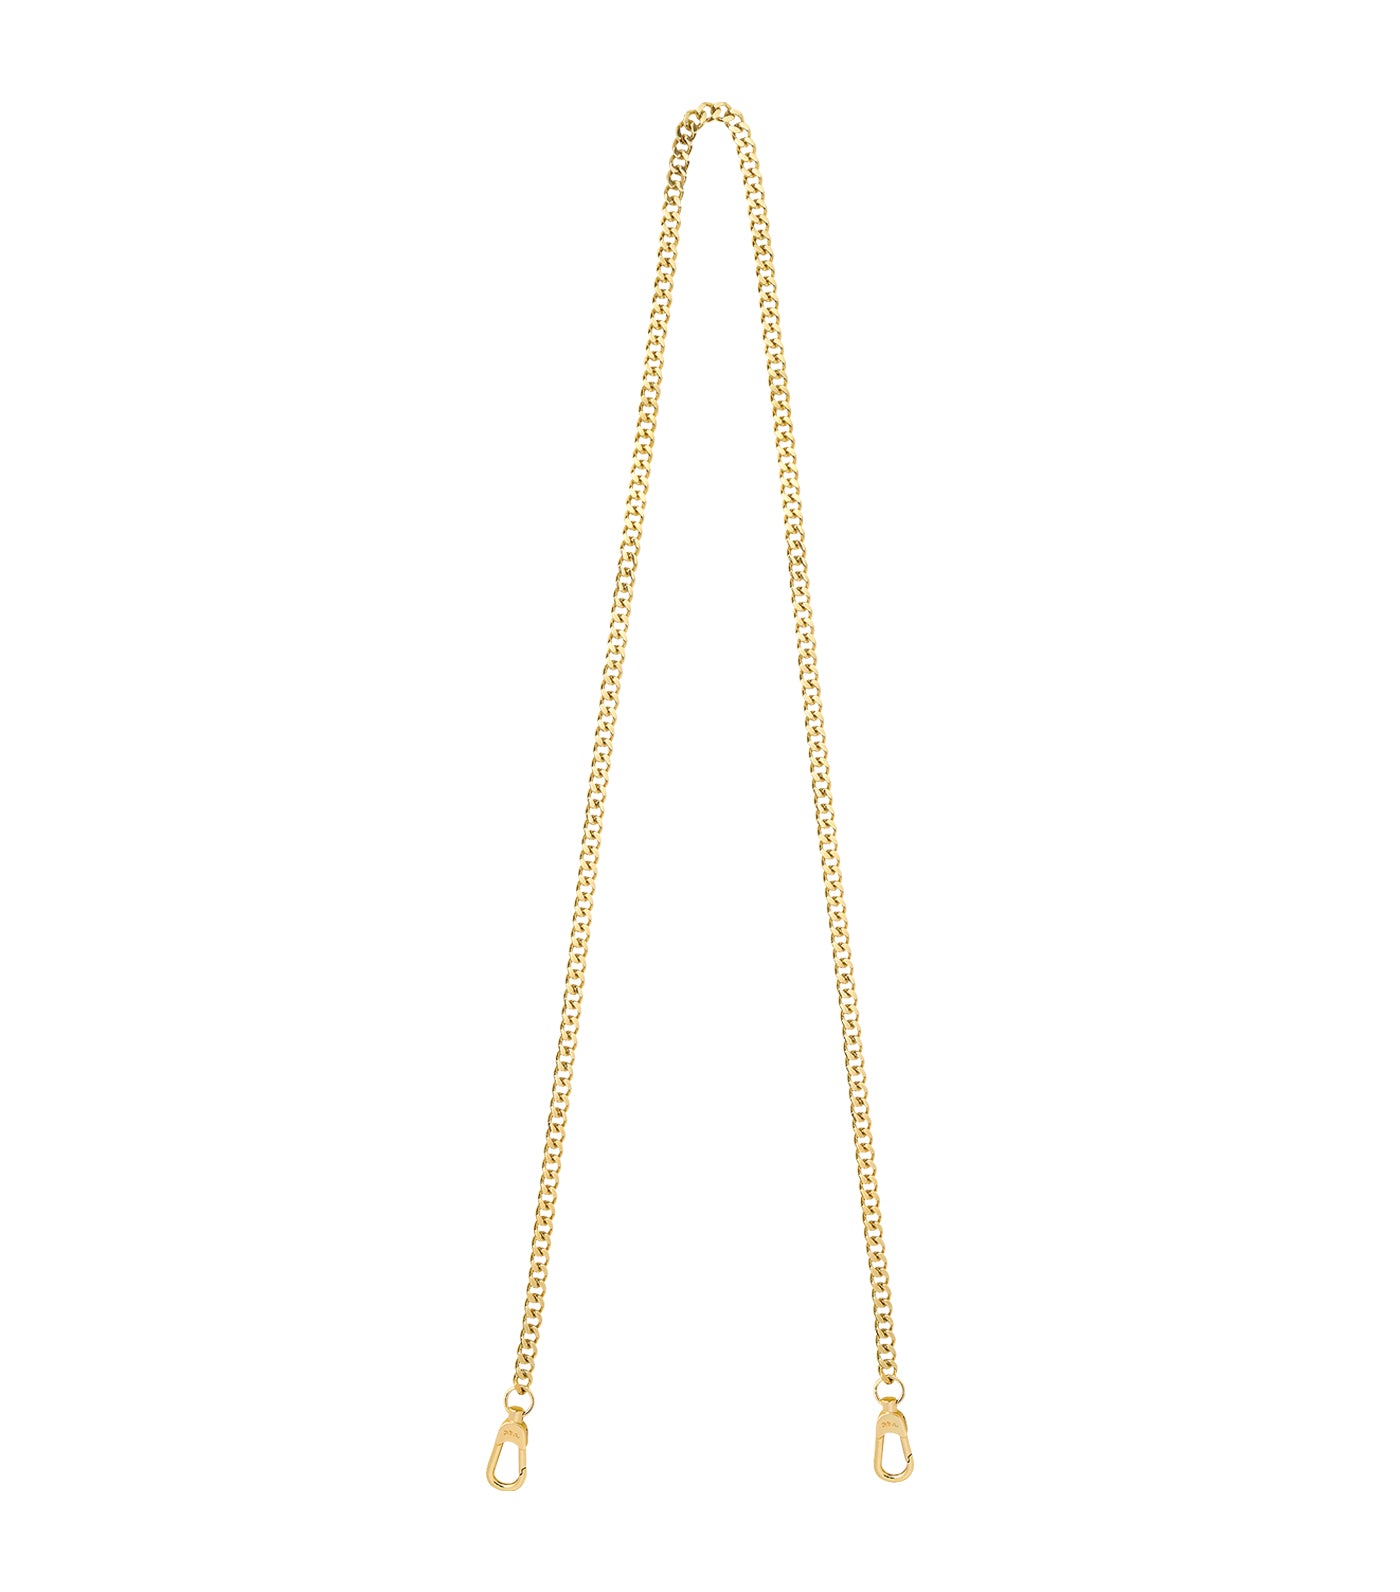 Chain Shoulder Strap Very Pale Gold